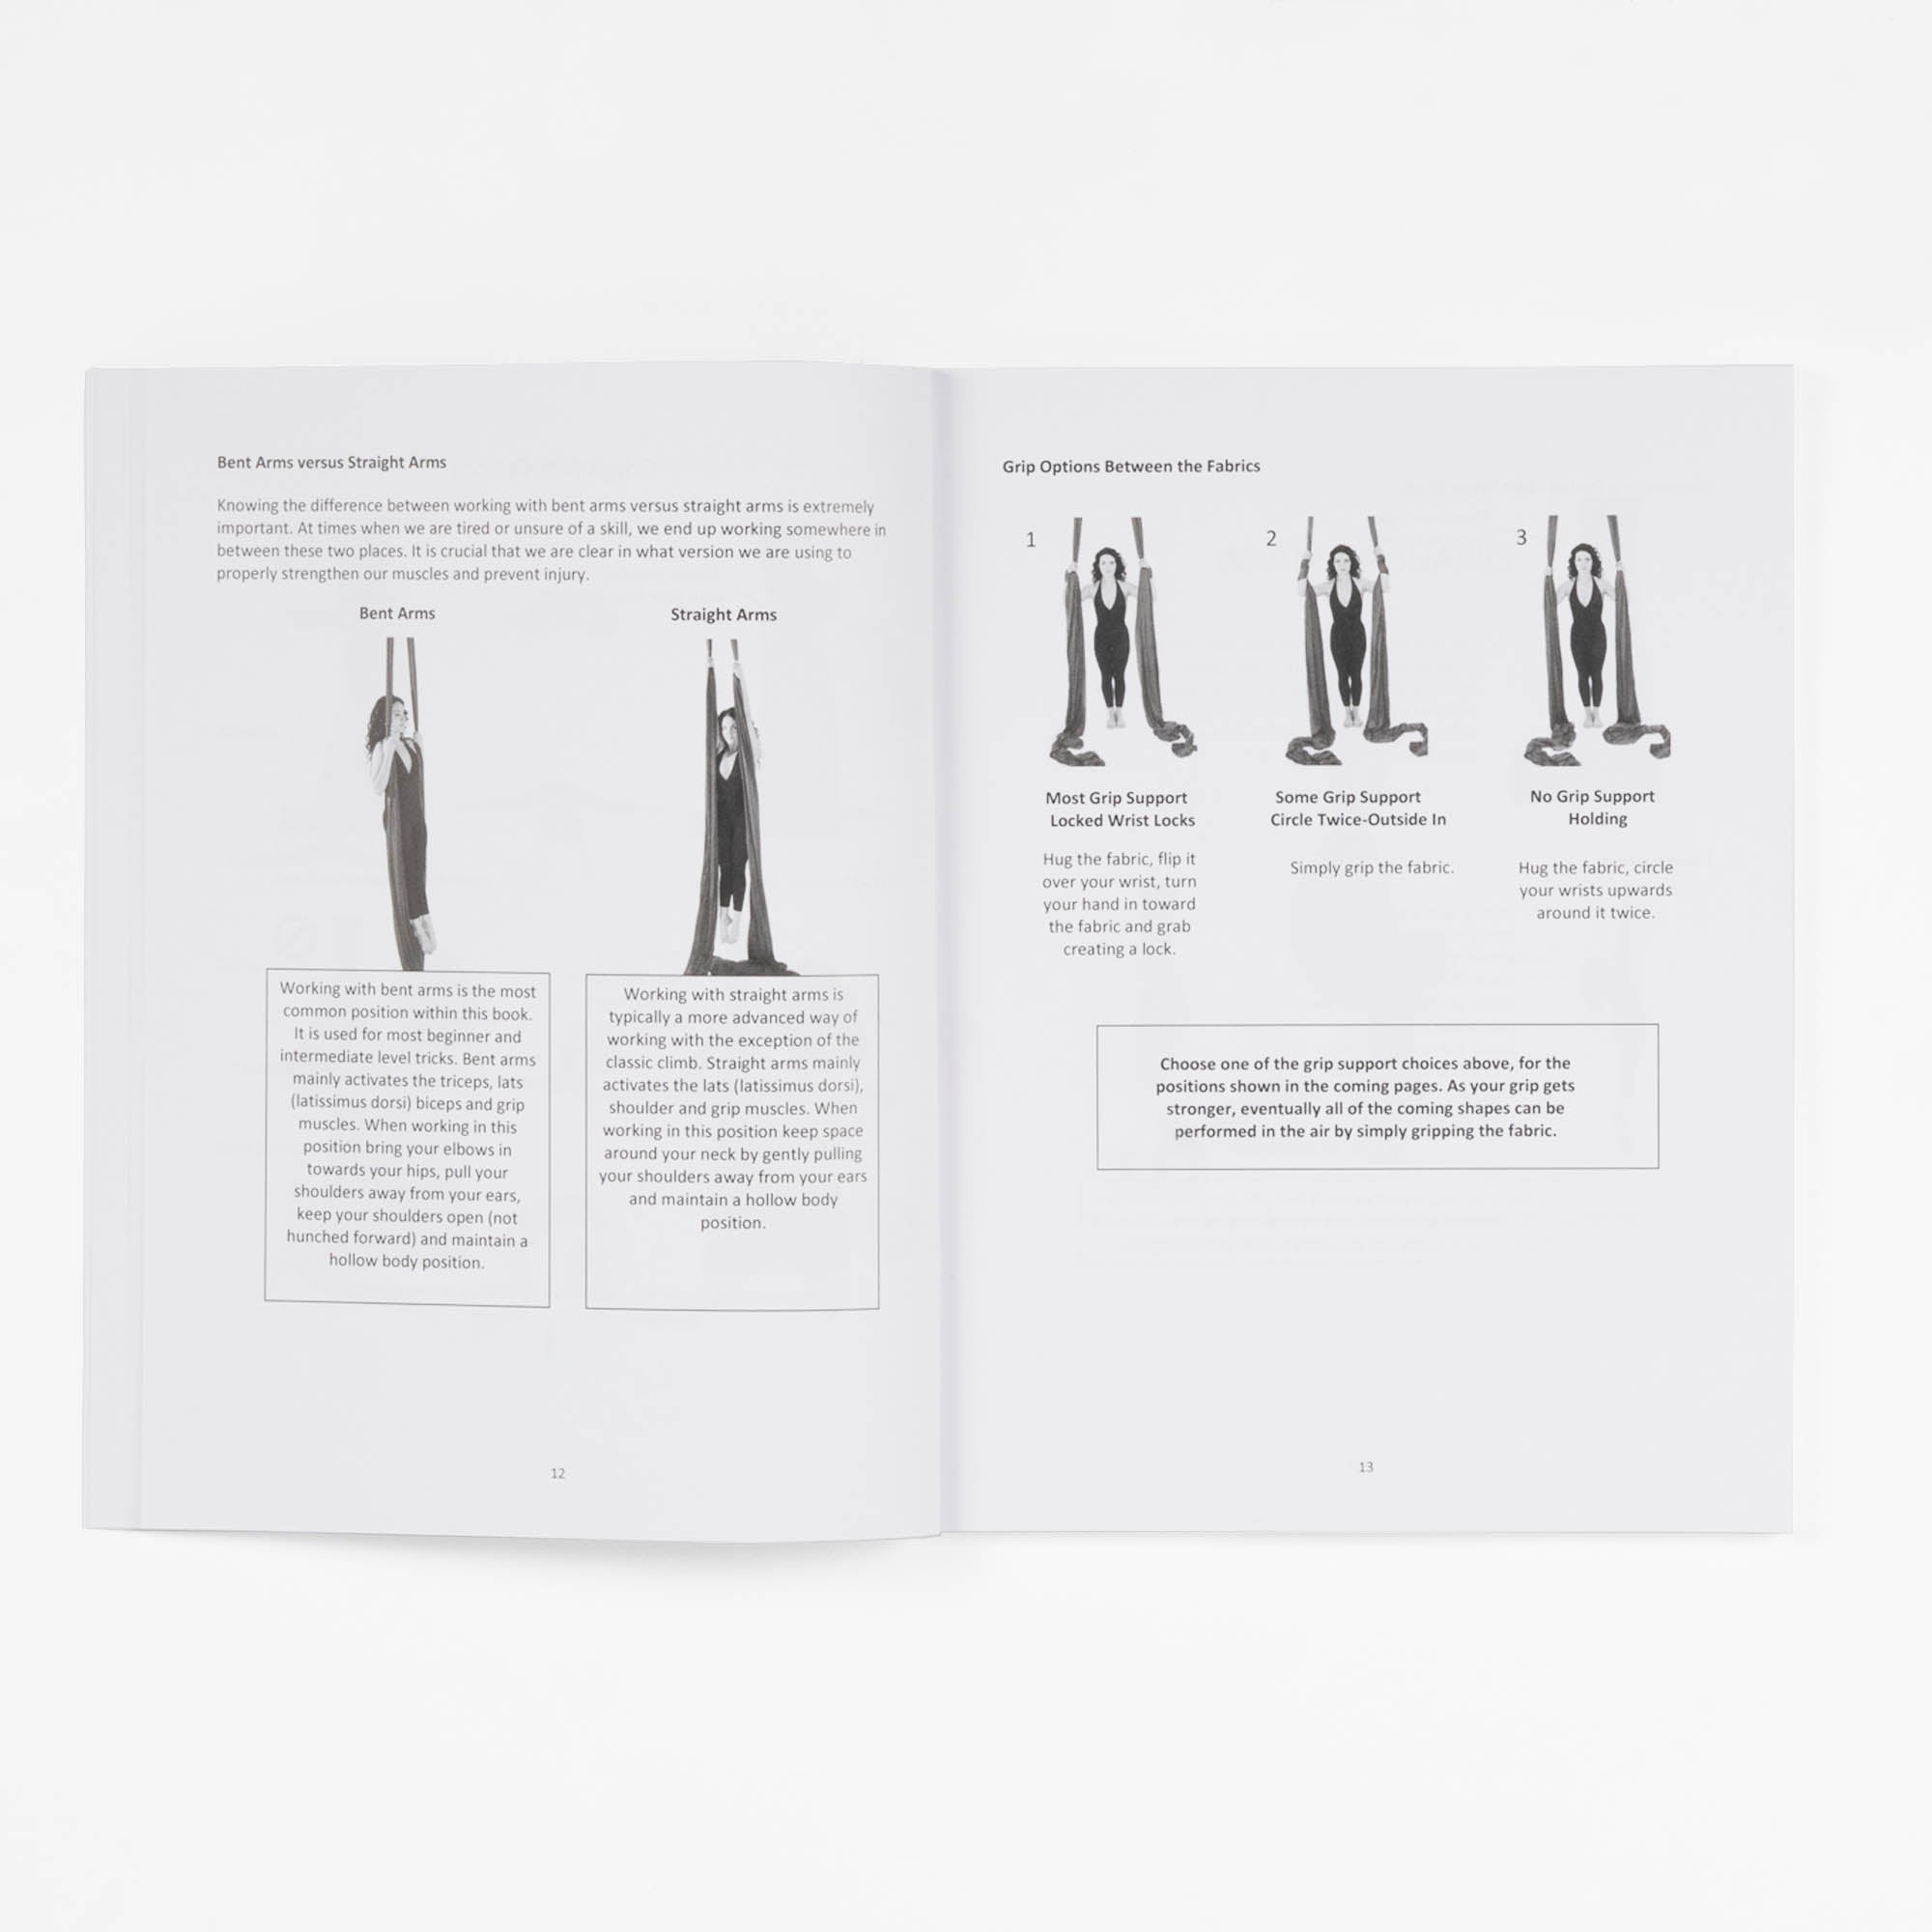 Intermediate guide example pages showing bent arms versus straight arms and grip options